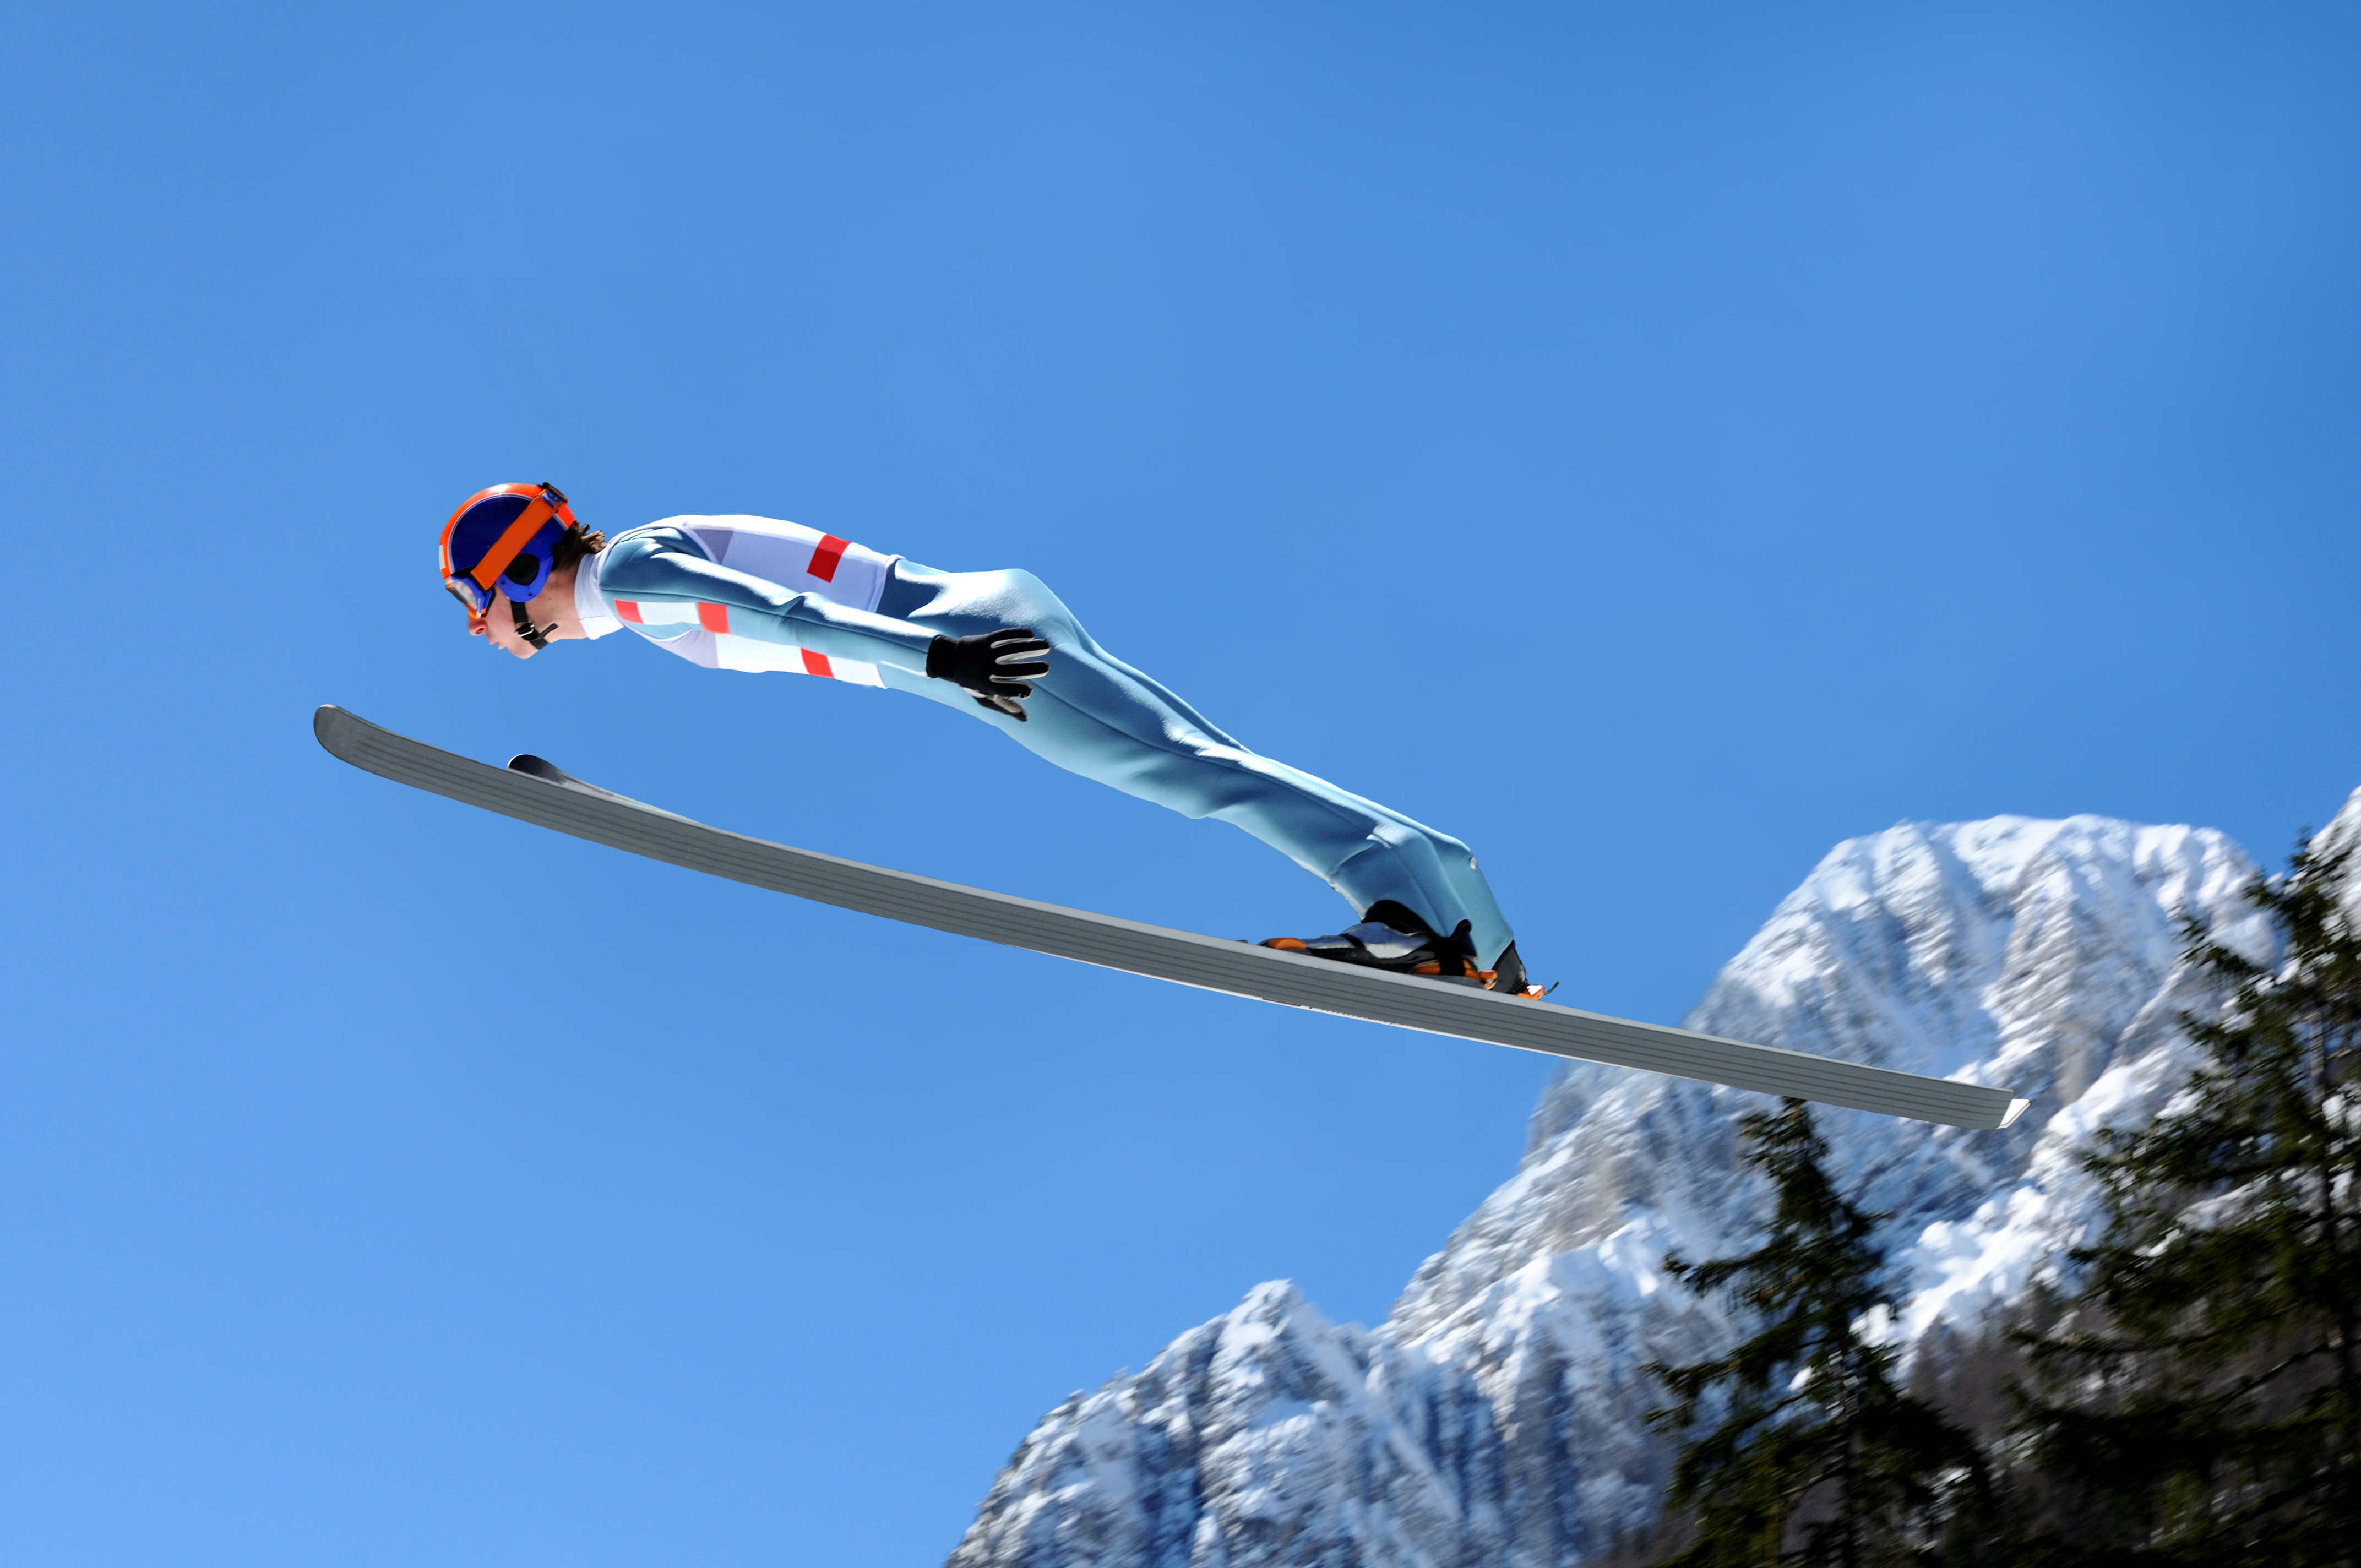 Ski jumper flying against the blue sky and the mountain